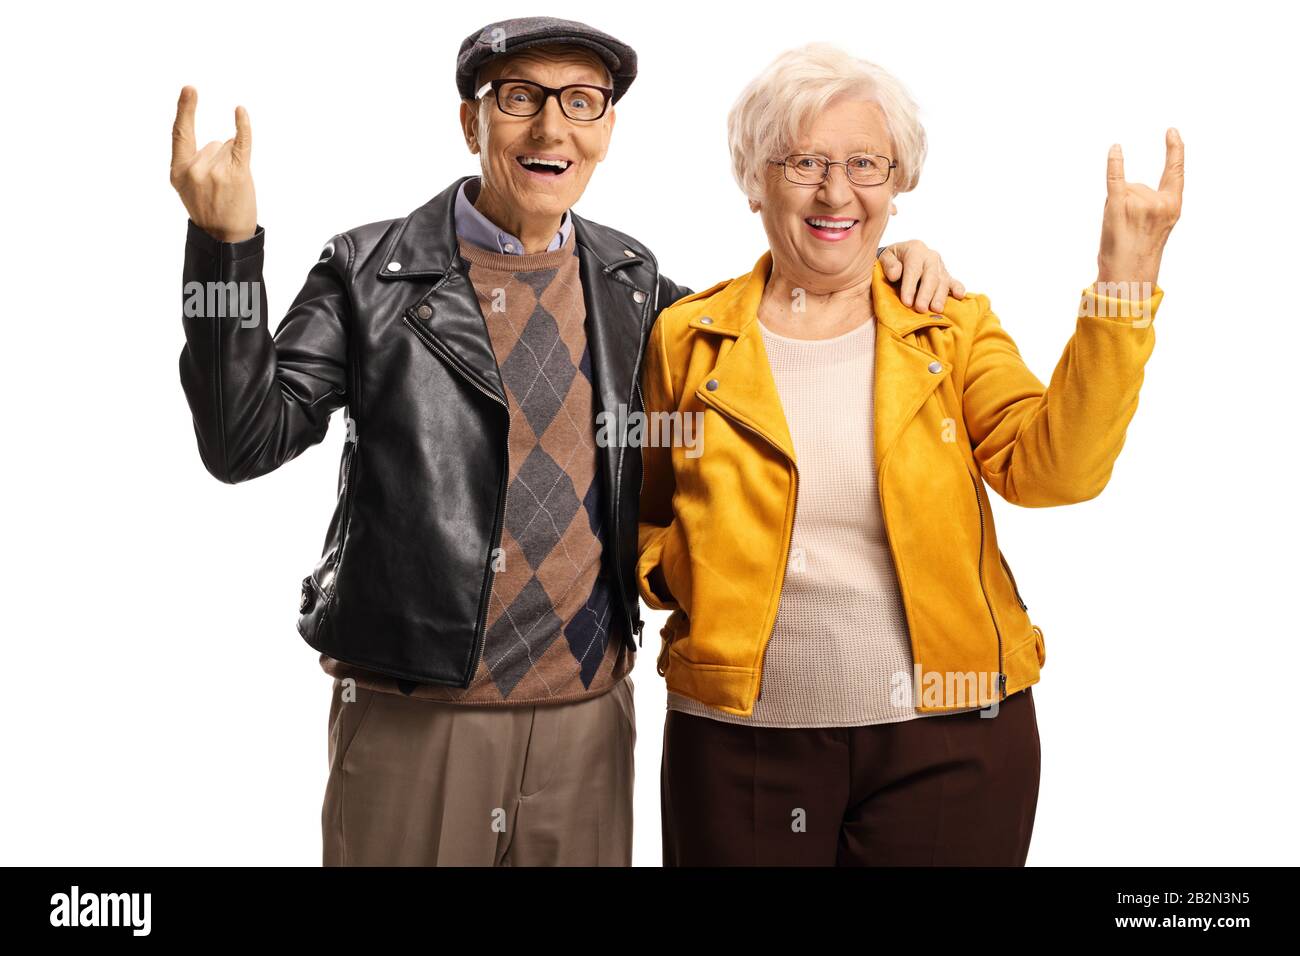 Senior man and woman with leather jackets gesturing a rock and roll sign isolated on white background Stock Photo